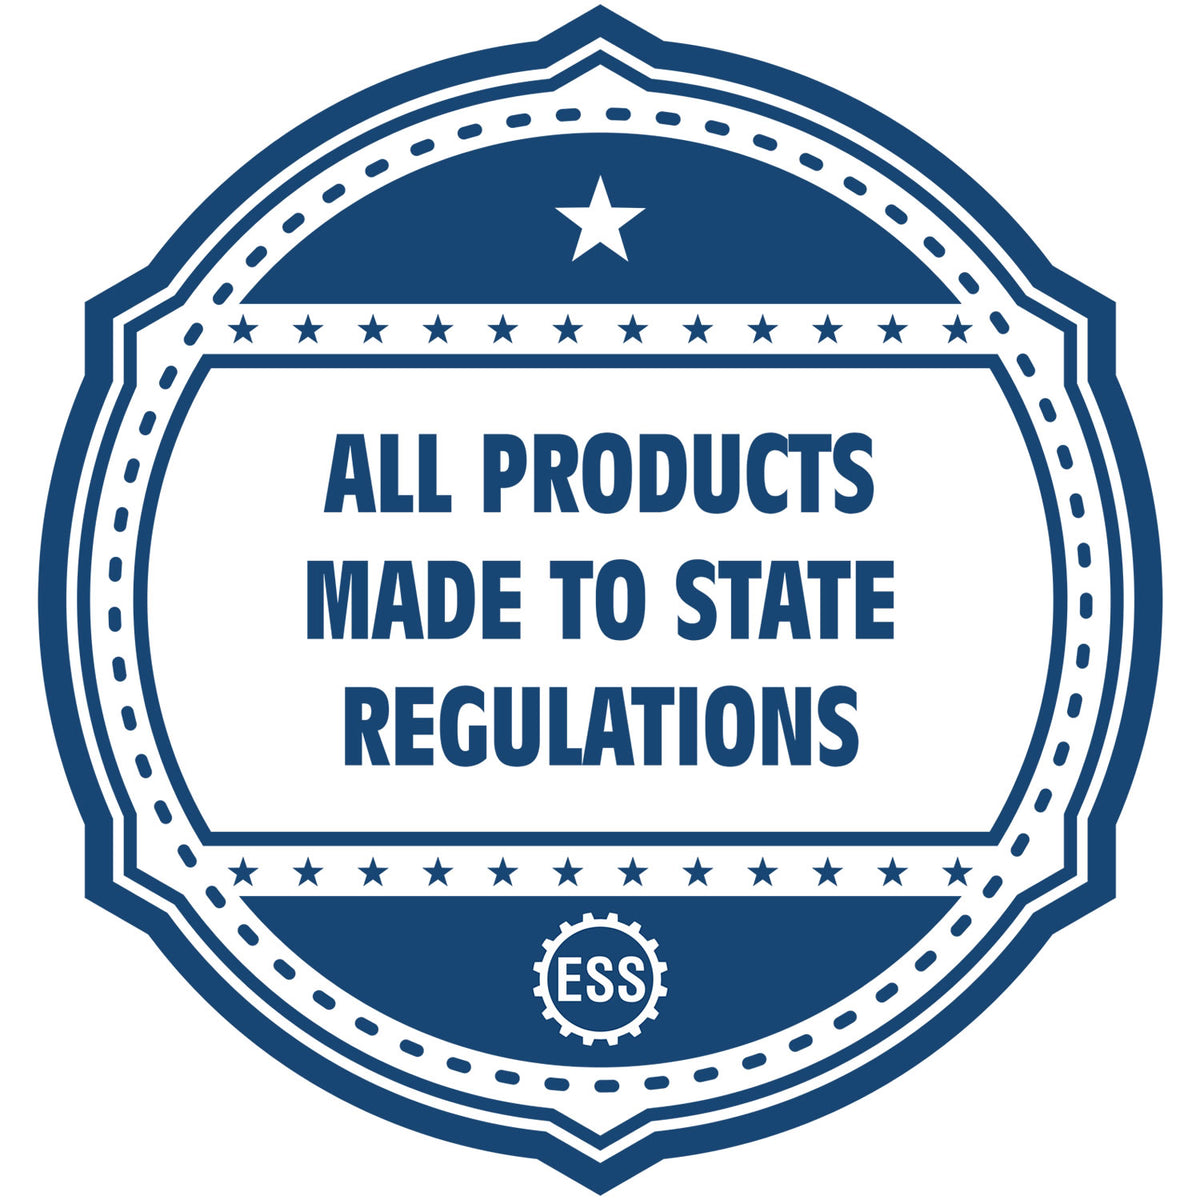 An icon or badge element for the Handheld Maine Land Surveyor Seal showing that this product is made in compliance with state regulations.